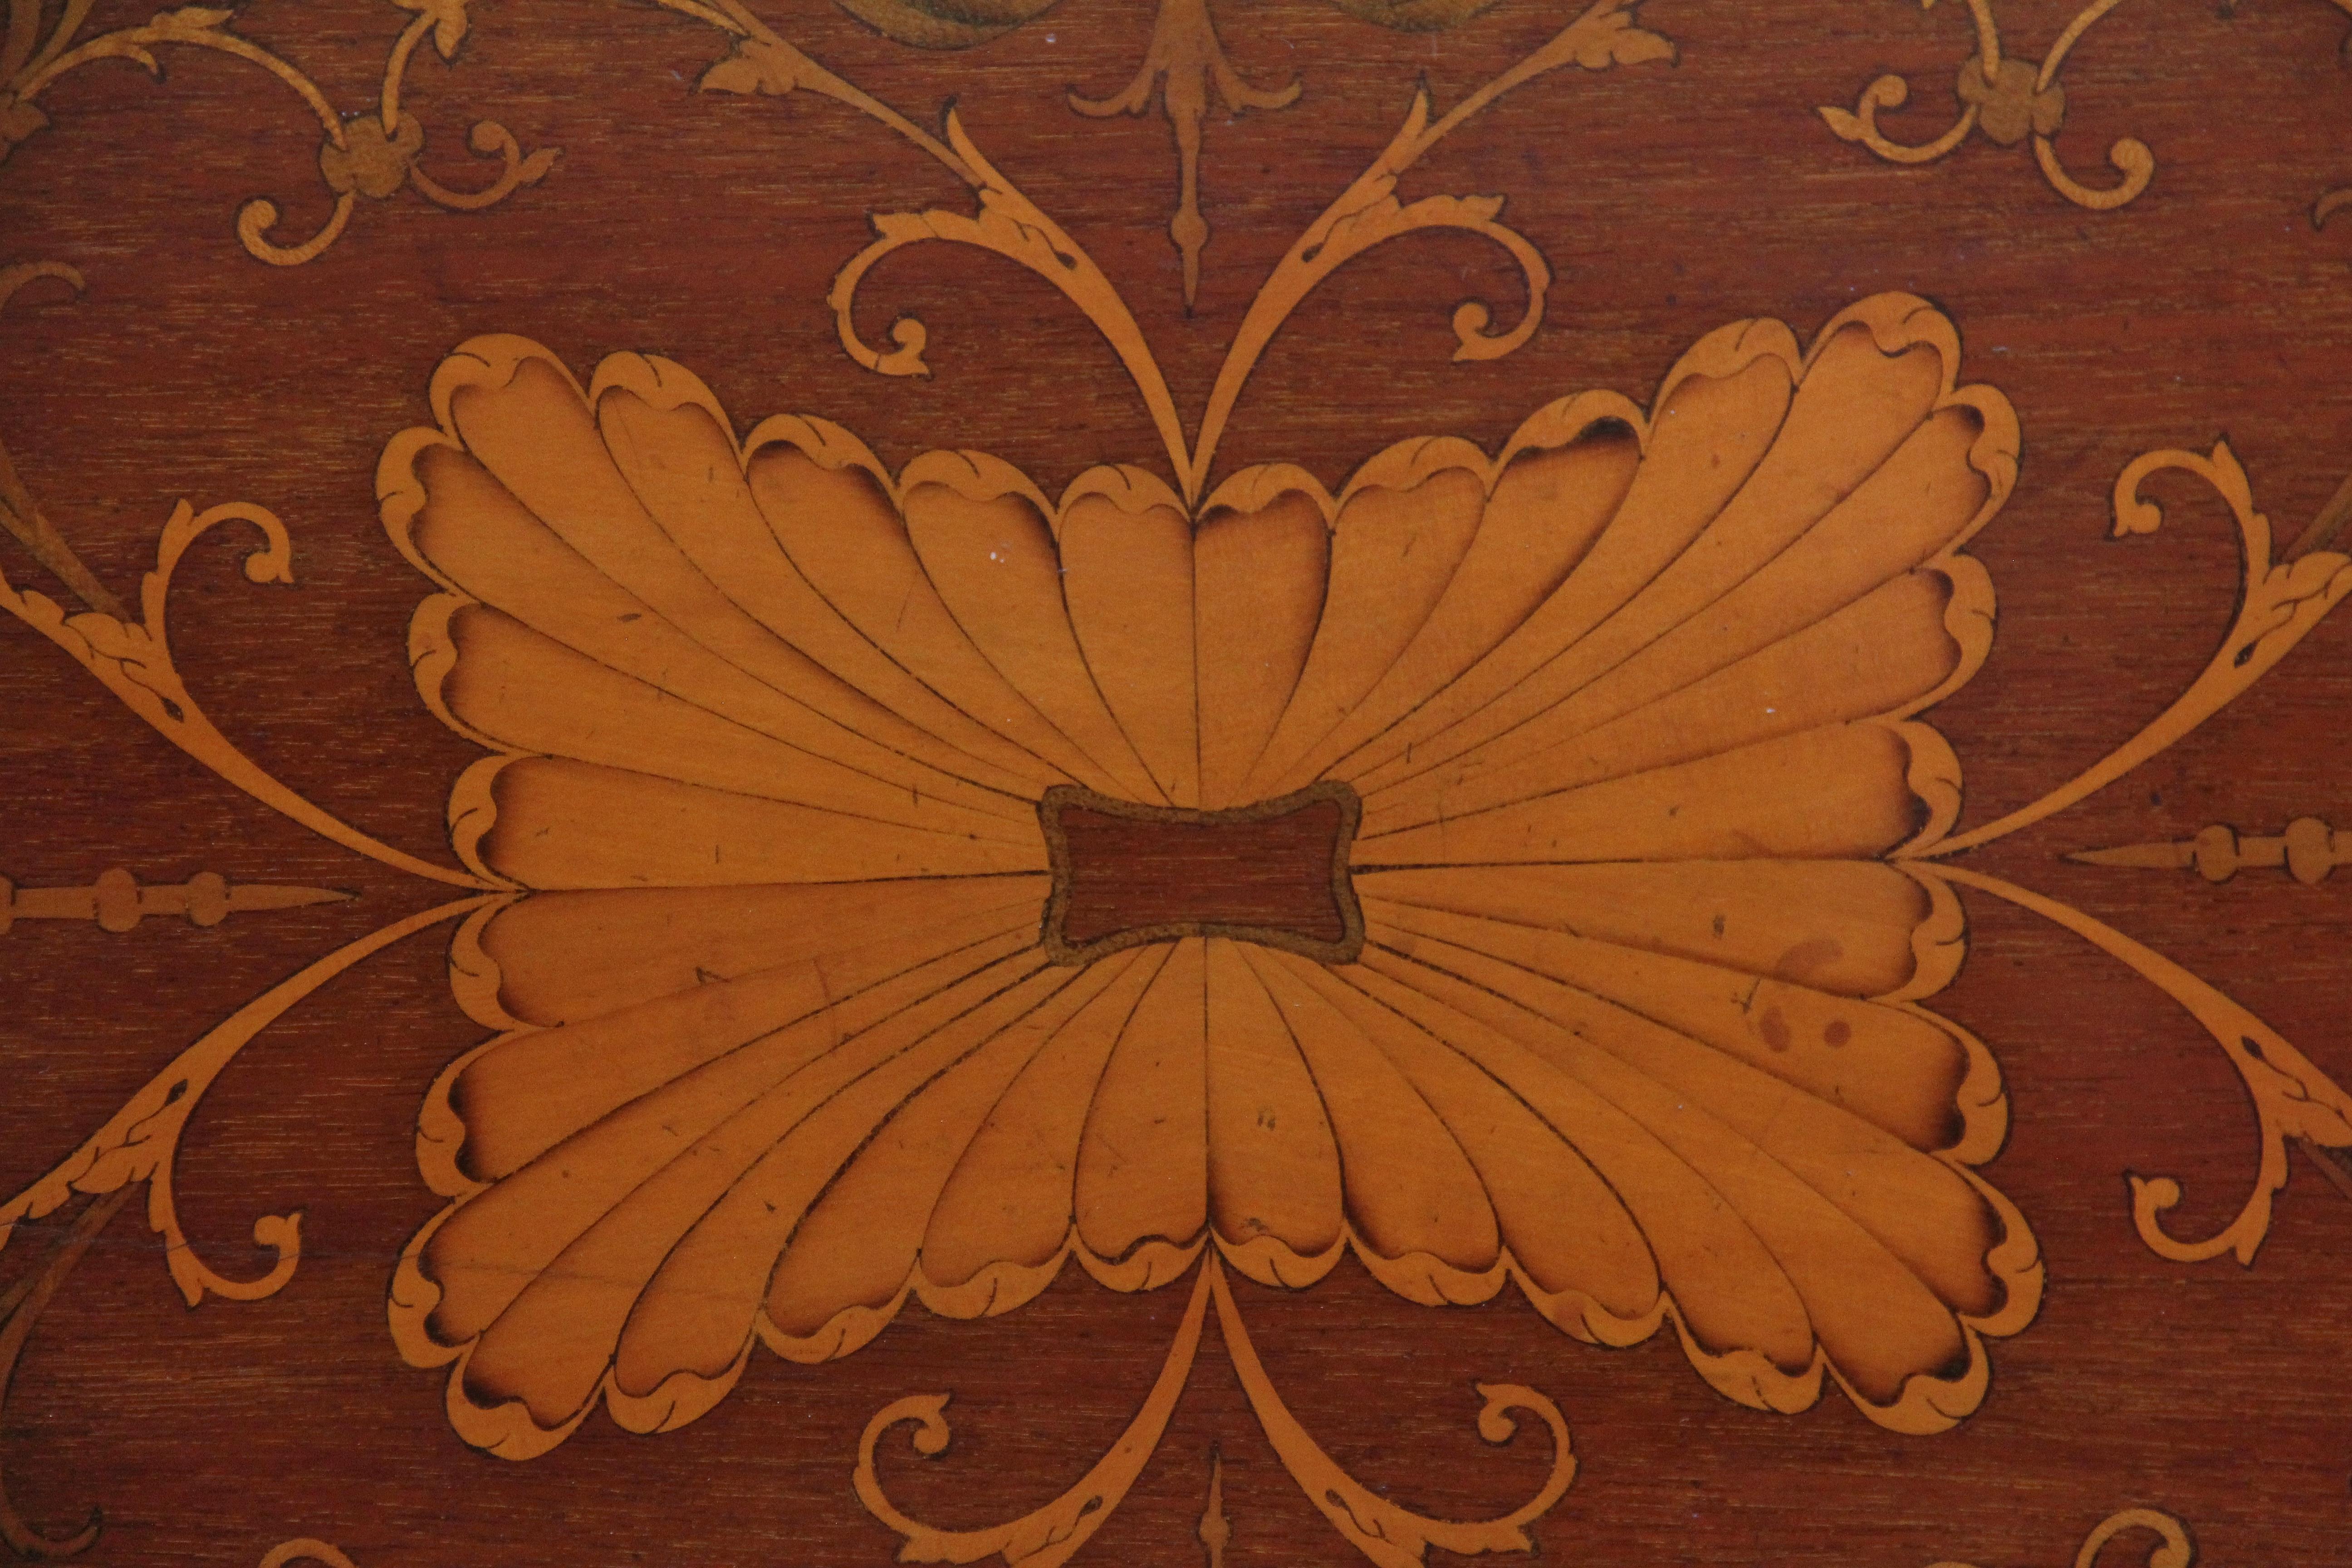 19th Century inlaid mahogany tray In Good Condition For Sale In Martlesham, GB